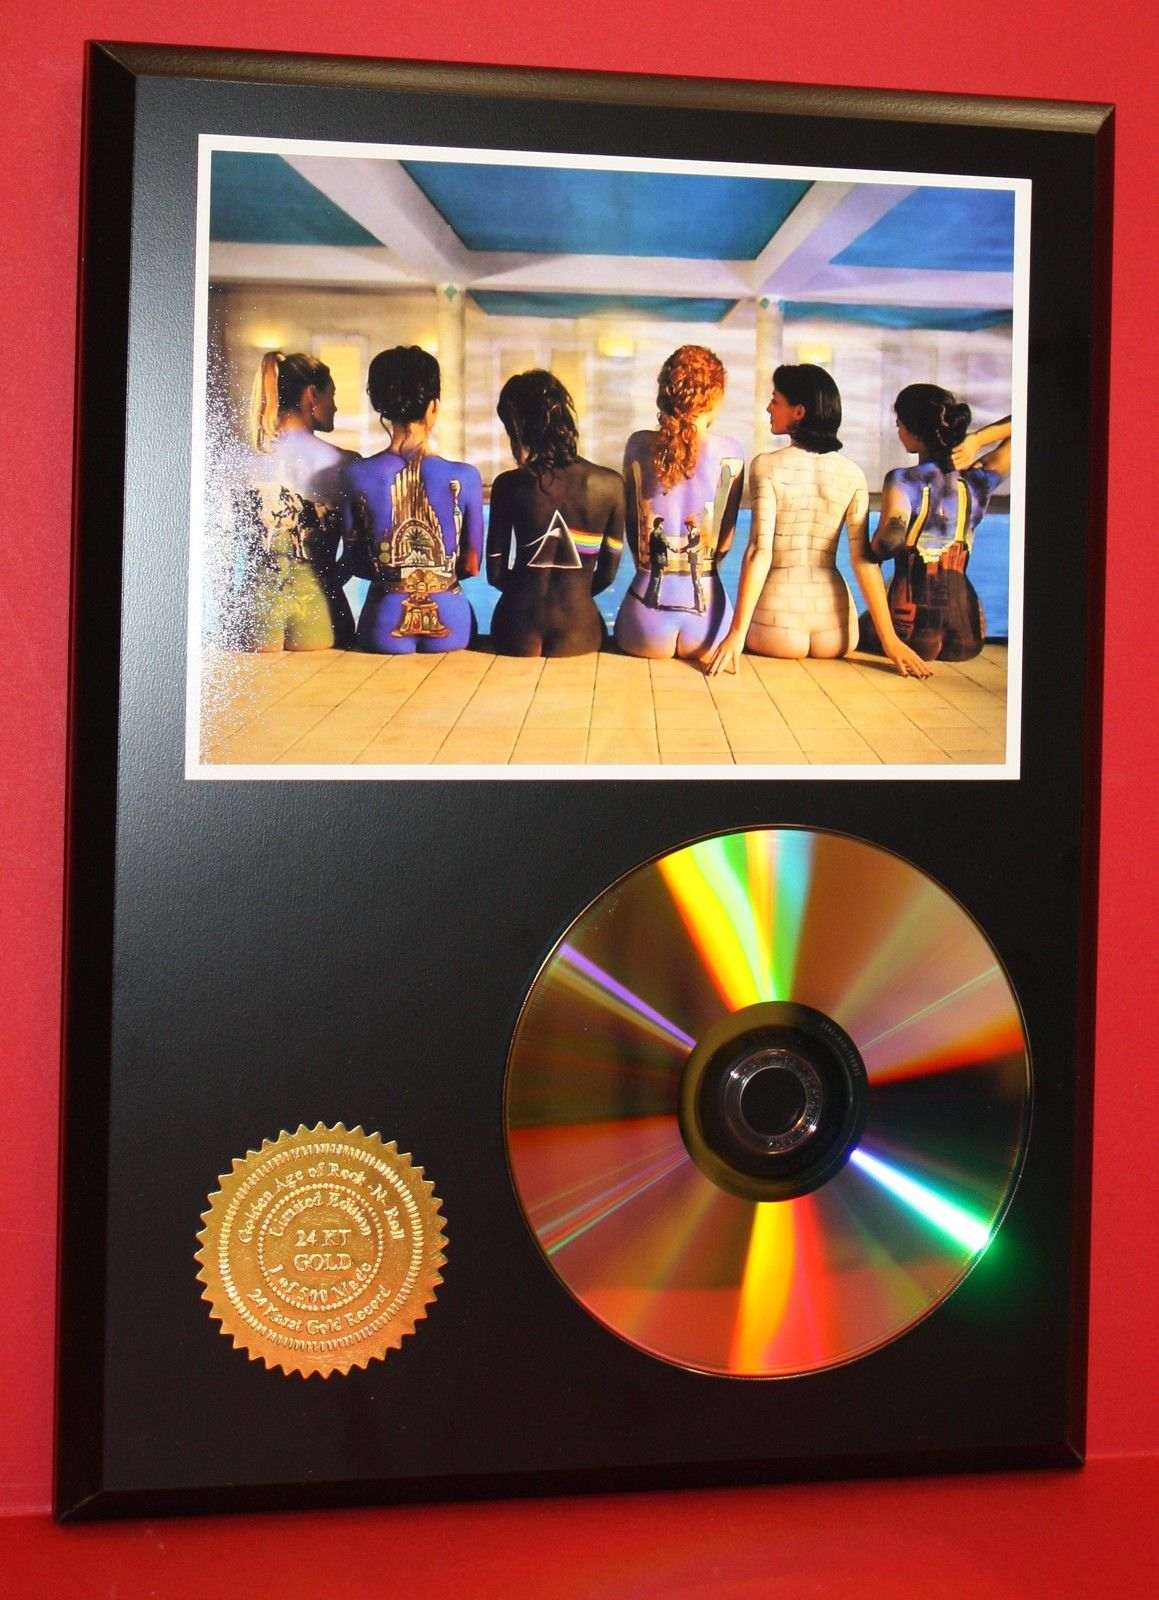 Pink Floyd Limited Edition Cd Disc Collectible Rare Music Display - Gold  Record Outlet Album and Disc Collectible Memorabilia